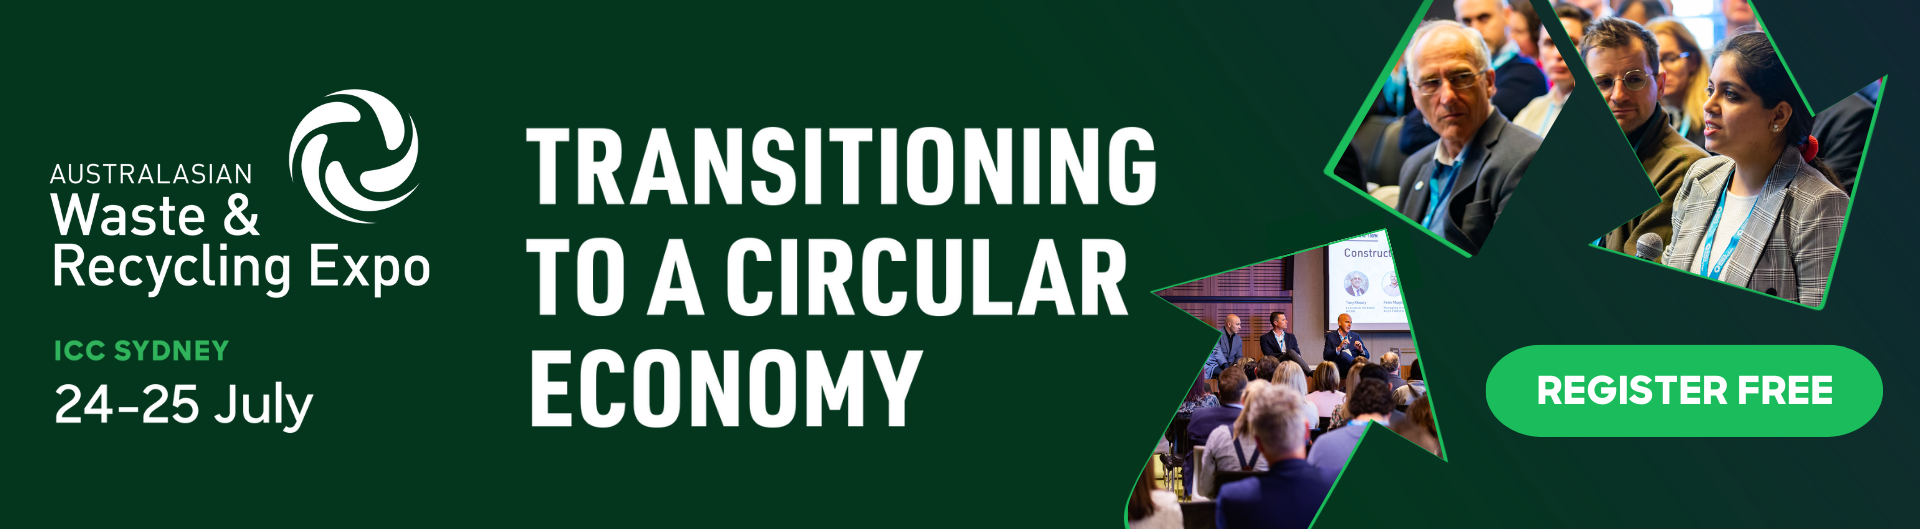 Waste and recycling expo, transitioning to a circular economy from 24-25 July